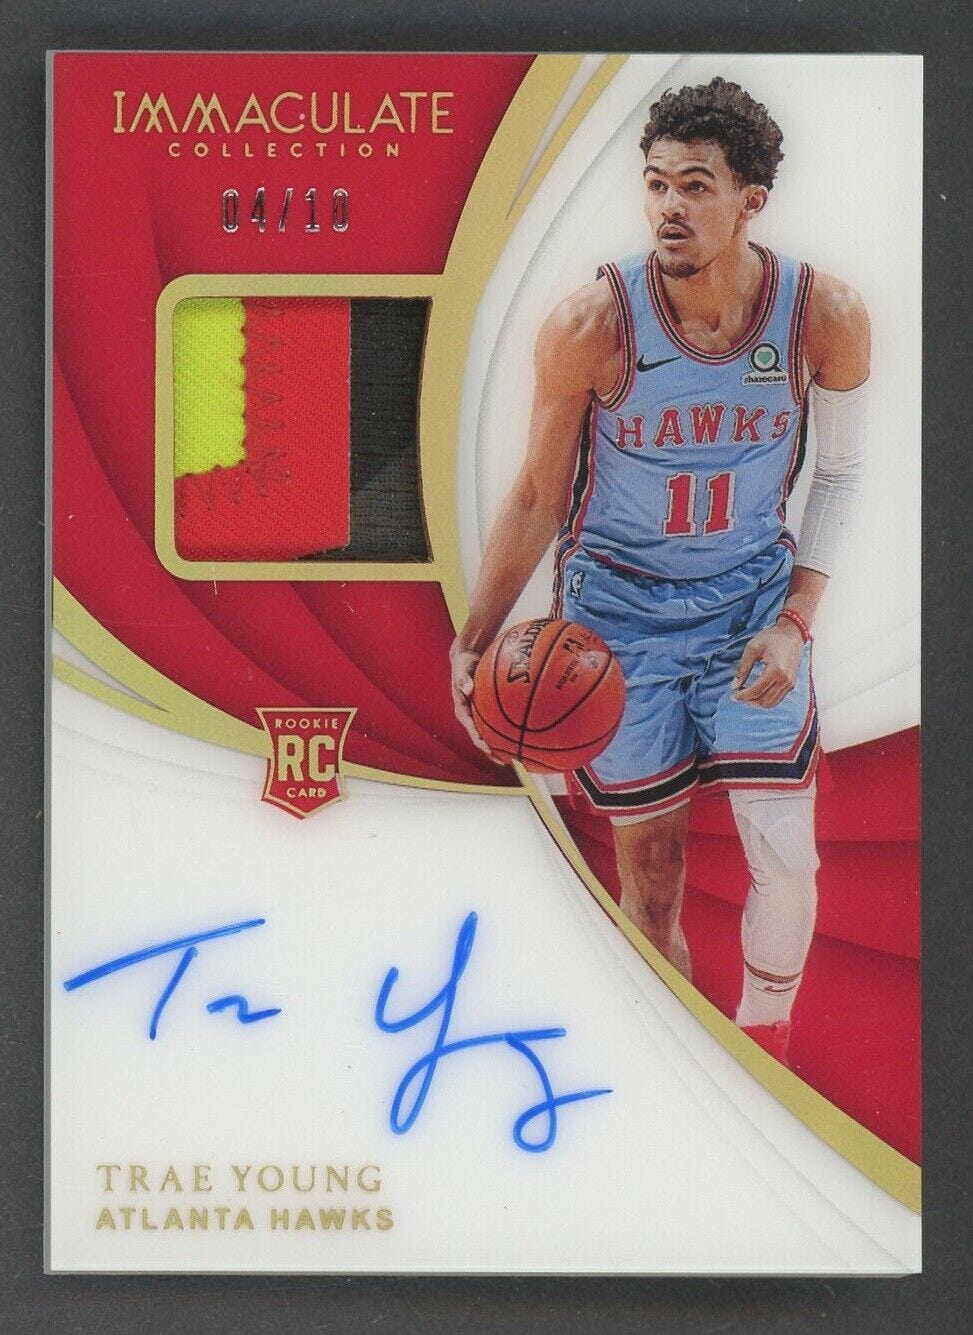 TRAE YOUNG'S TOP 10 ROOKIE CARDS. A LIST OF THE MOST VALUABLE TRAE